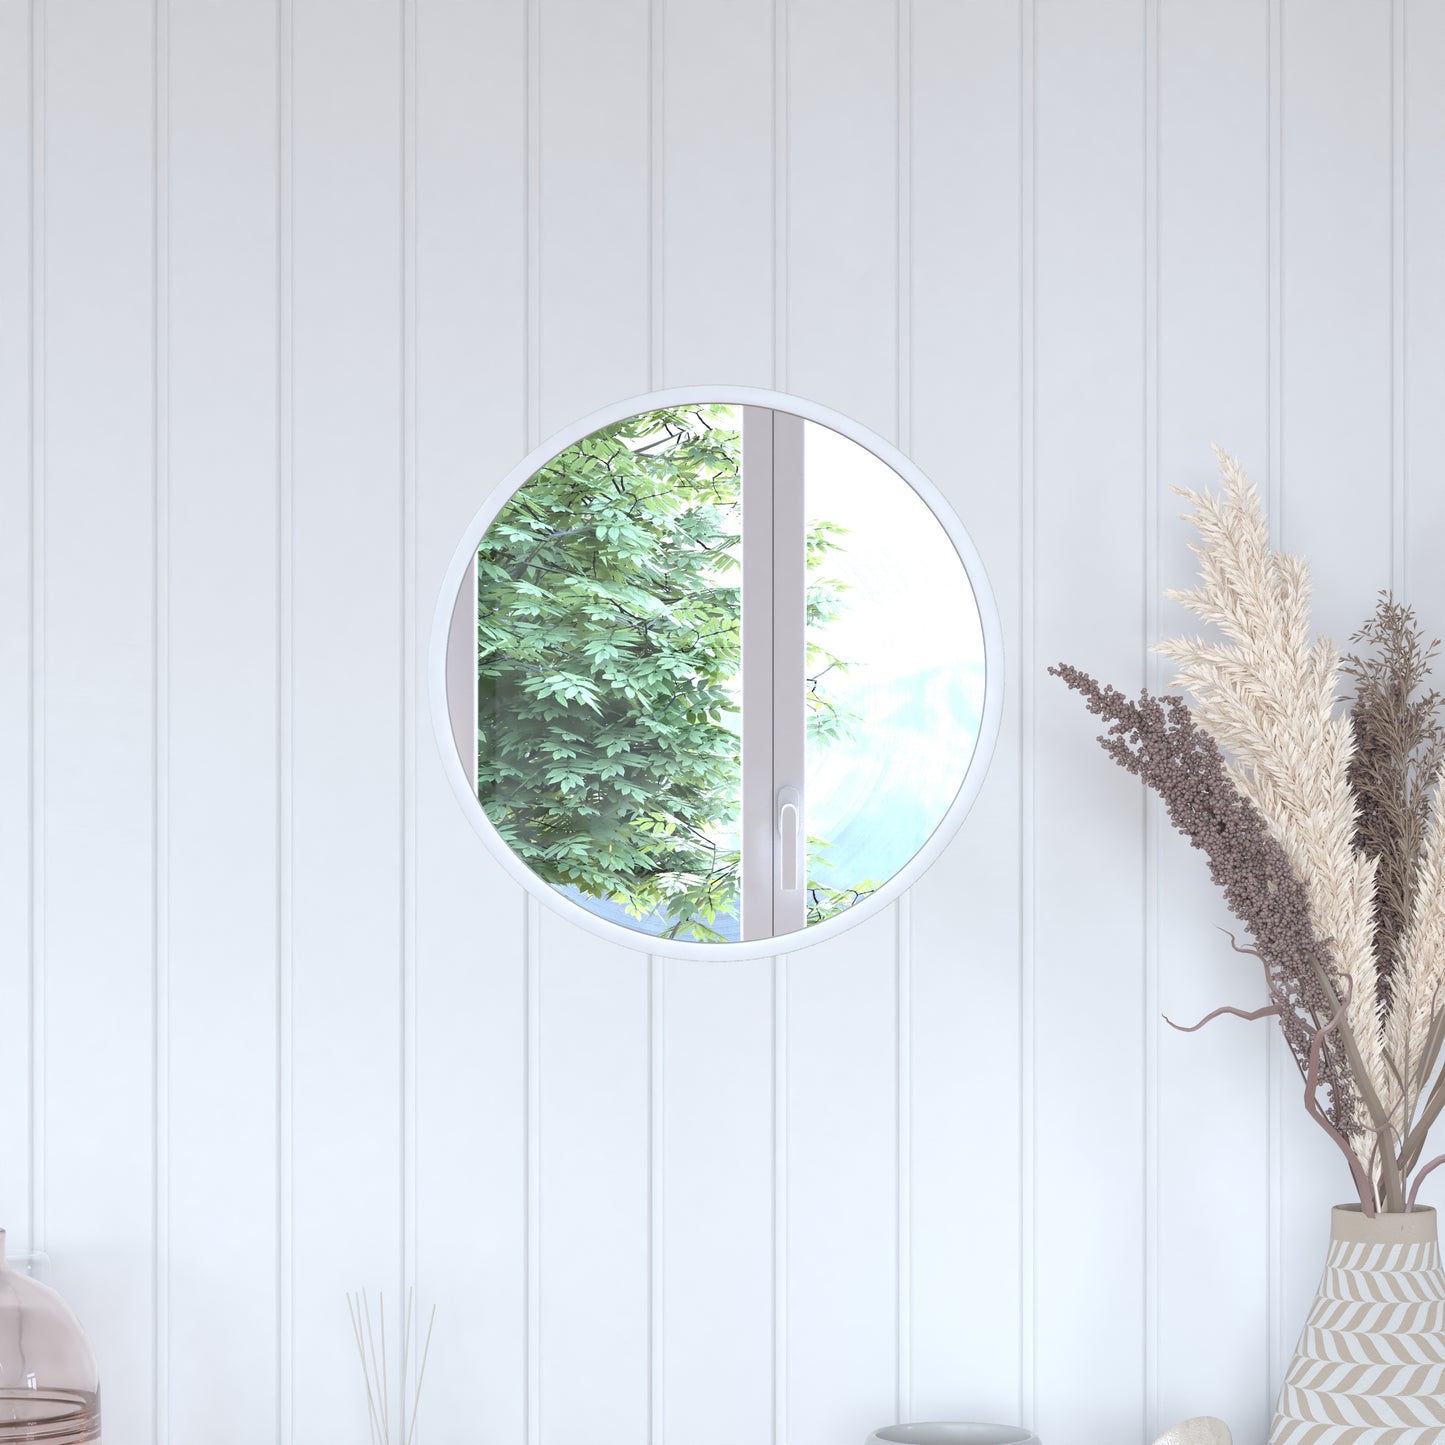 Silver 16" Round Wall Mirror HFKHD-6GD-CRE8-891315-GG